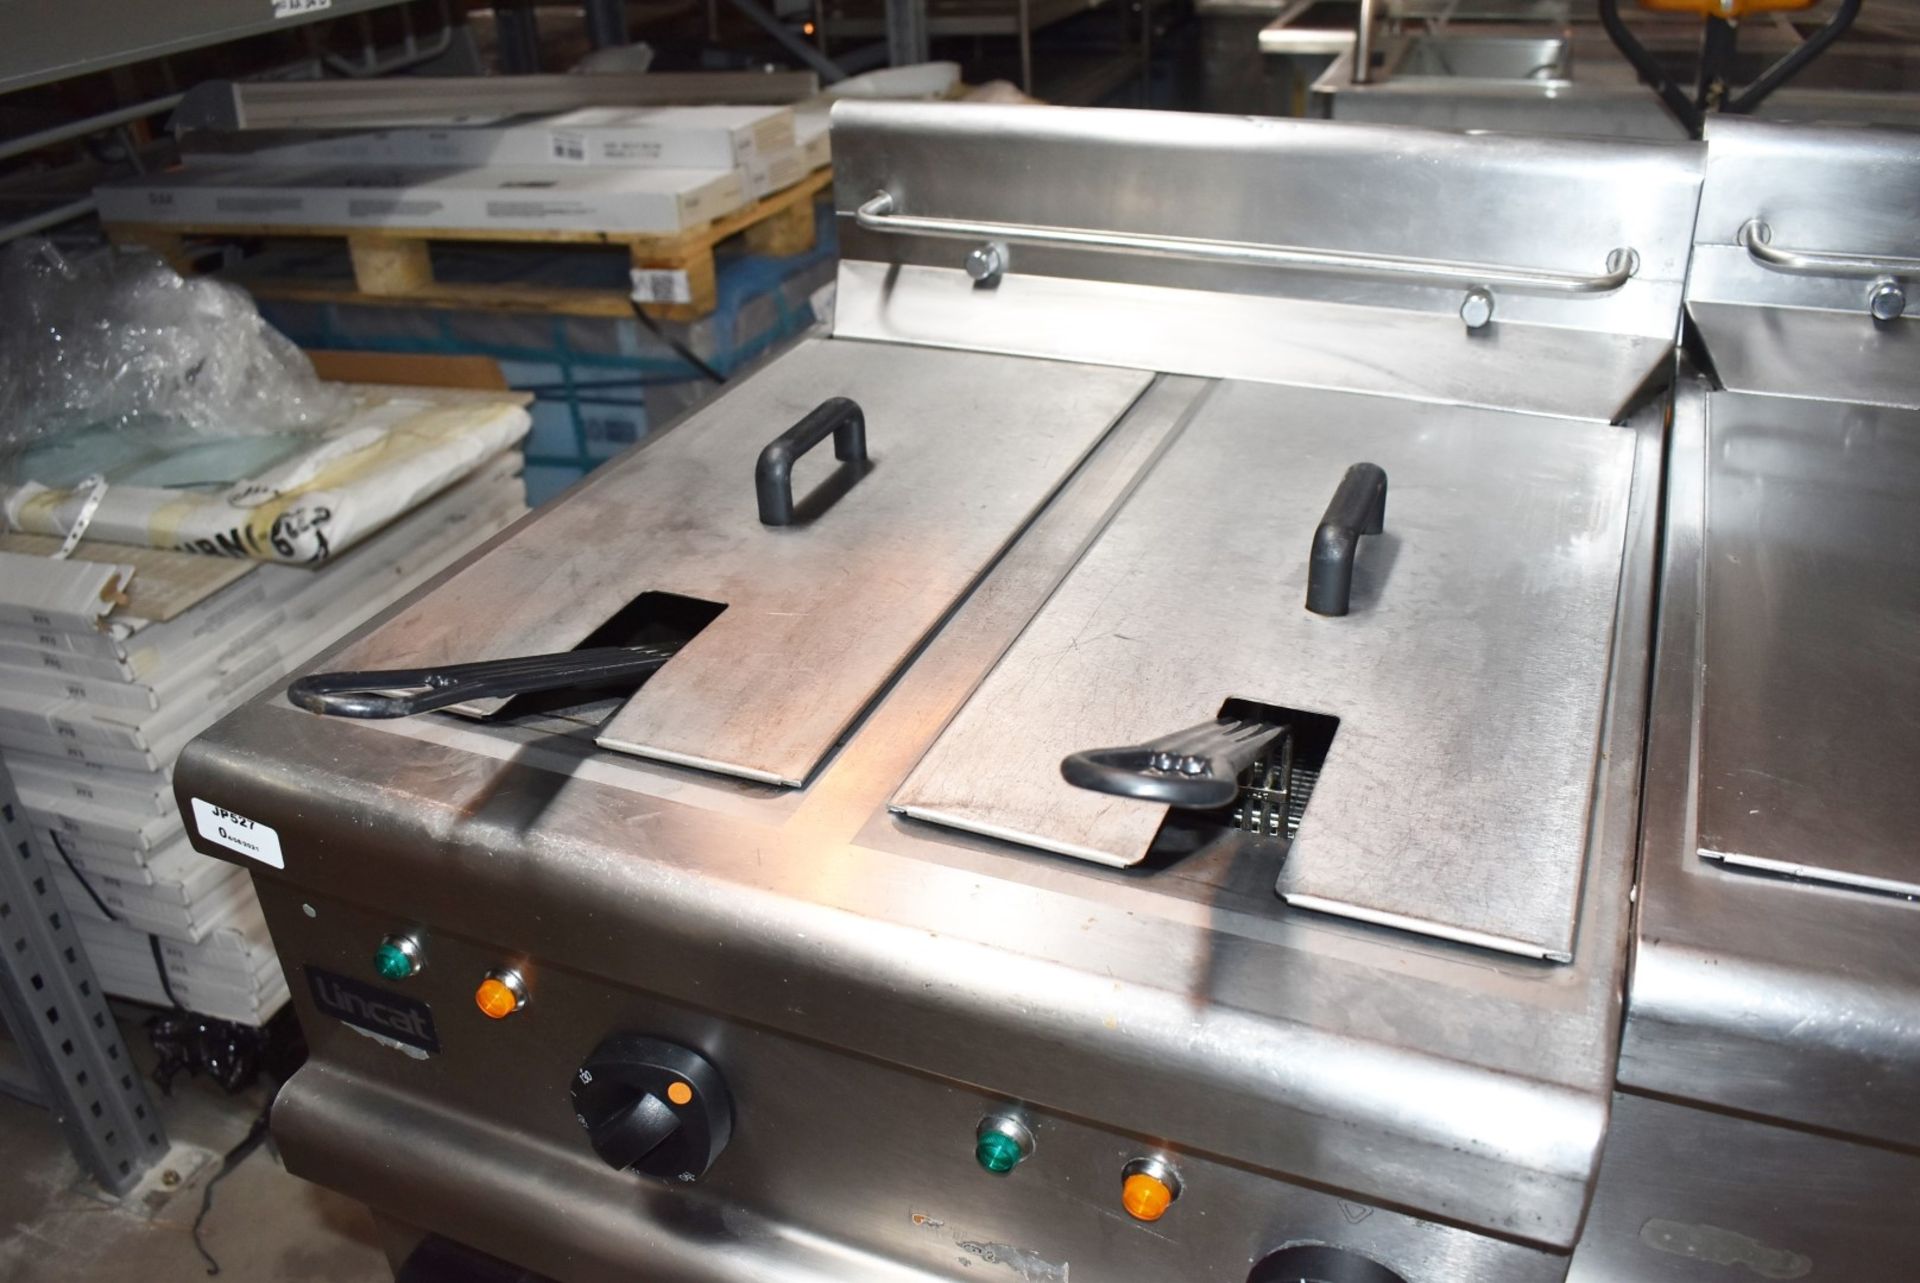 1 x Lincat Opus 700 OE7113 Single Large Tank Electric Fryer With Built In Filteration - 240V / 3PH - Image 3 of 14